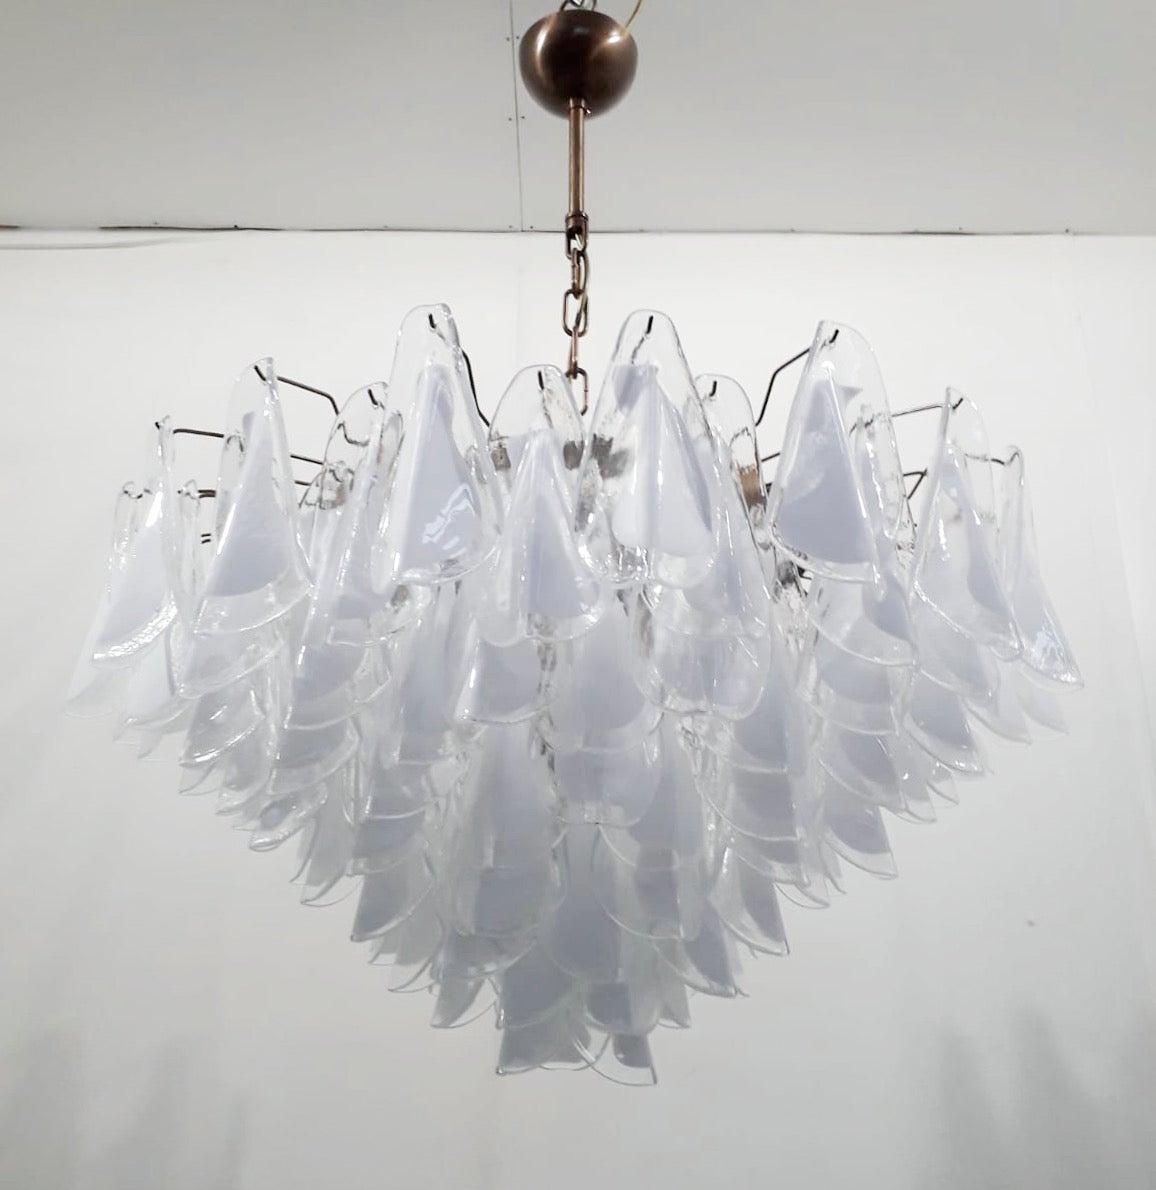 Italian chandelier with milky white Murano glass petals, mounted on bronzed frame by Fabio Ltd, made in Italy
12-light / E26 or E27 type / max 60W each
Measures: Diameter 40 inches, height 24 inches plus chain and canopy
Order only / this item ships